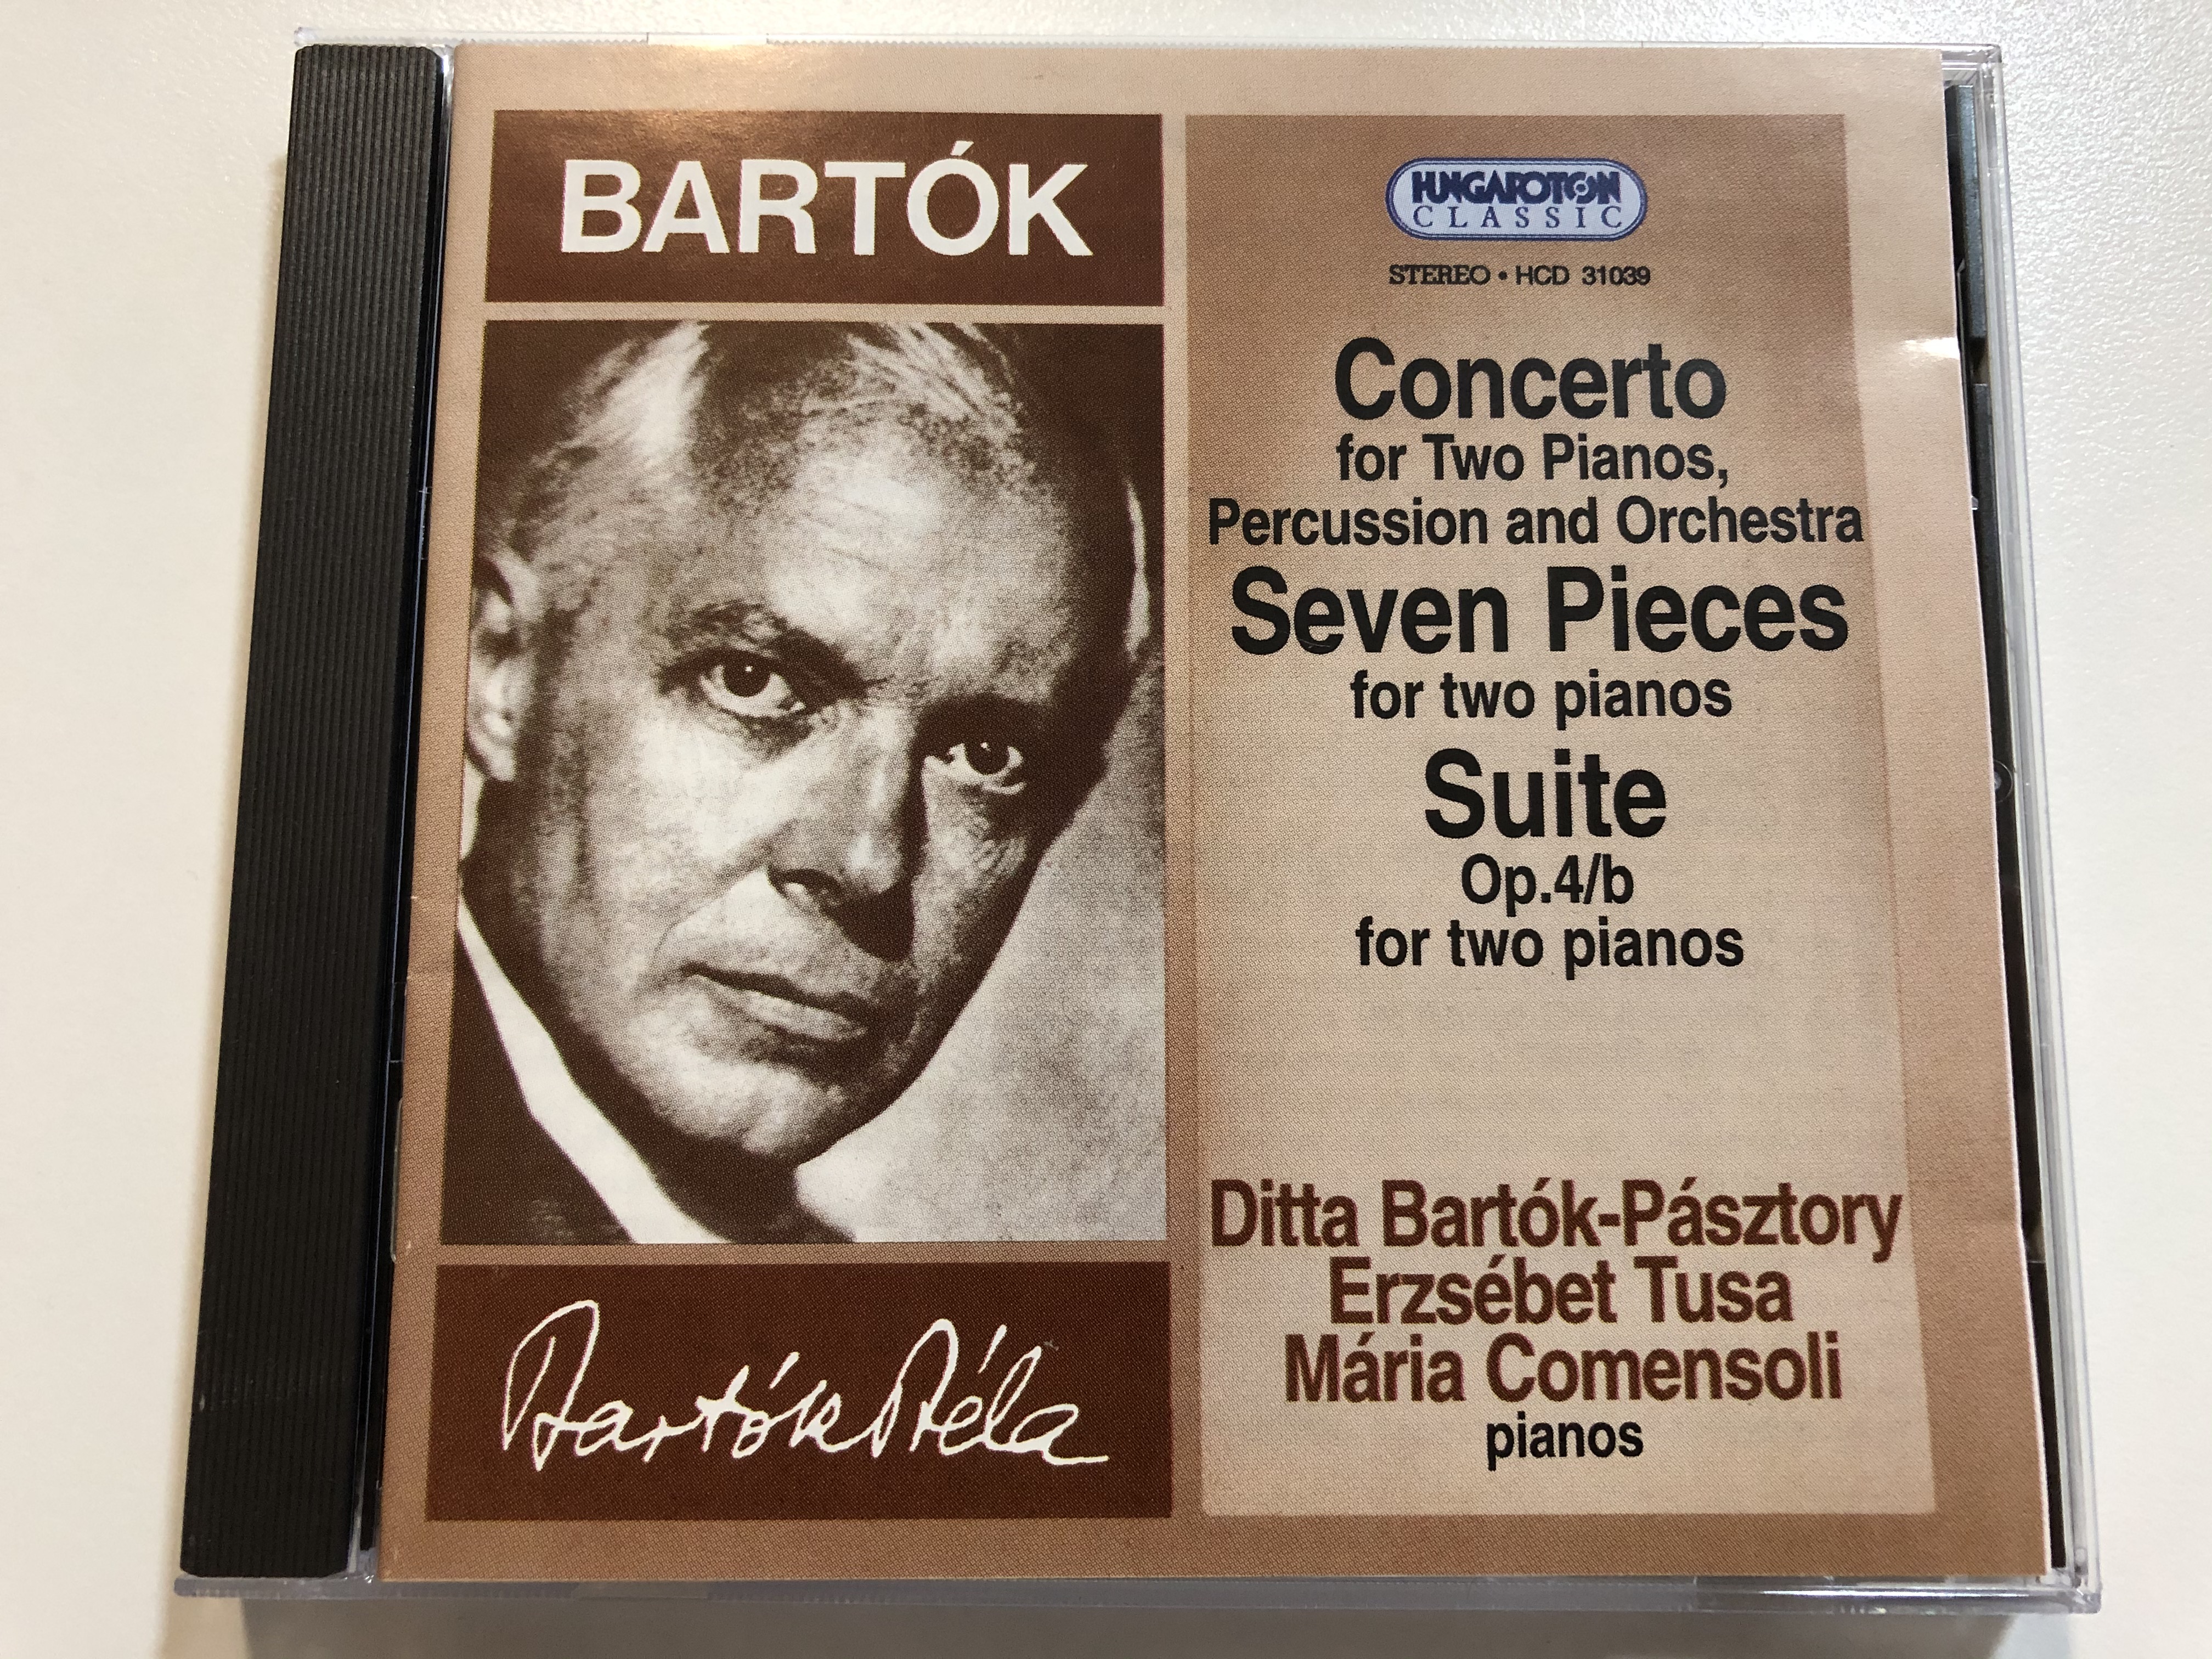 bartok-concerto-for-two-pianos-percussion-and-orchestra-seven-pieces-for-two-pianos-suite-op.4b-for-two-pianos-ditta-bartok-pasztory-erzsebet-tusa-maria-comensoli-pianos-hungaroton-1-.jpg